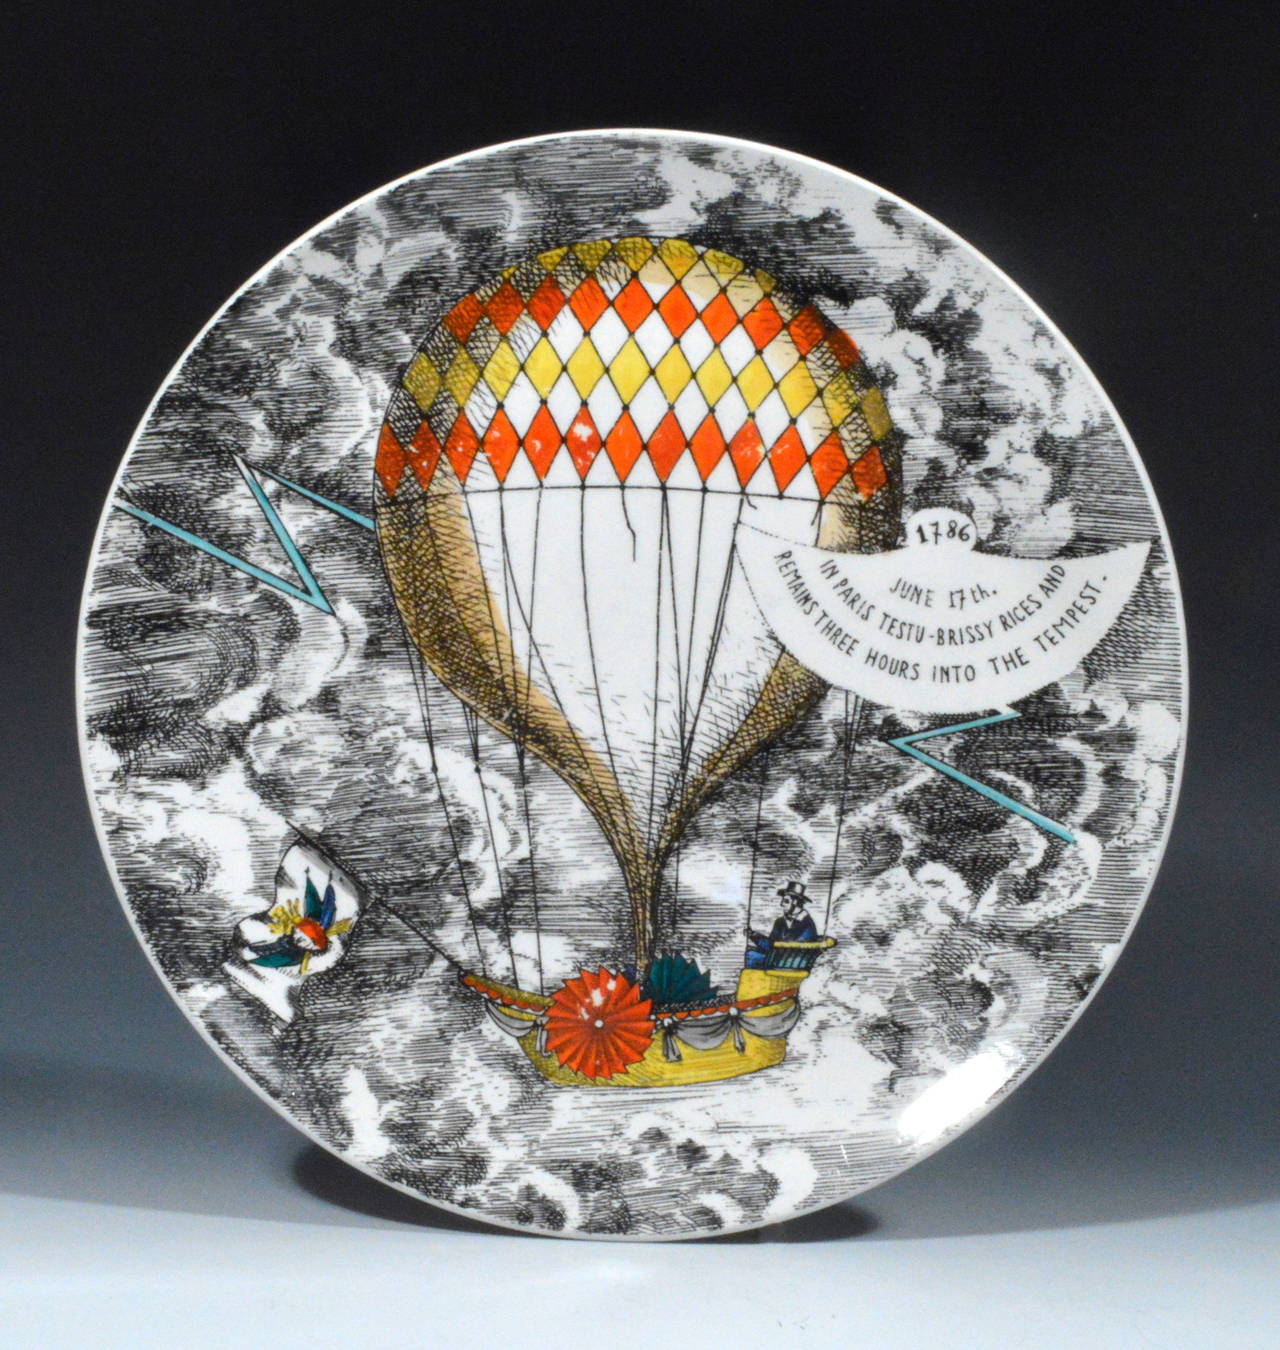 Piero Fornasetti Porcelain Plates with the Mongolfiere (Hot Air) Design 1